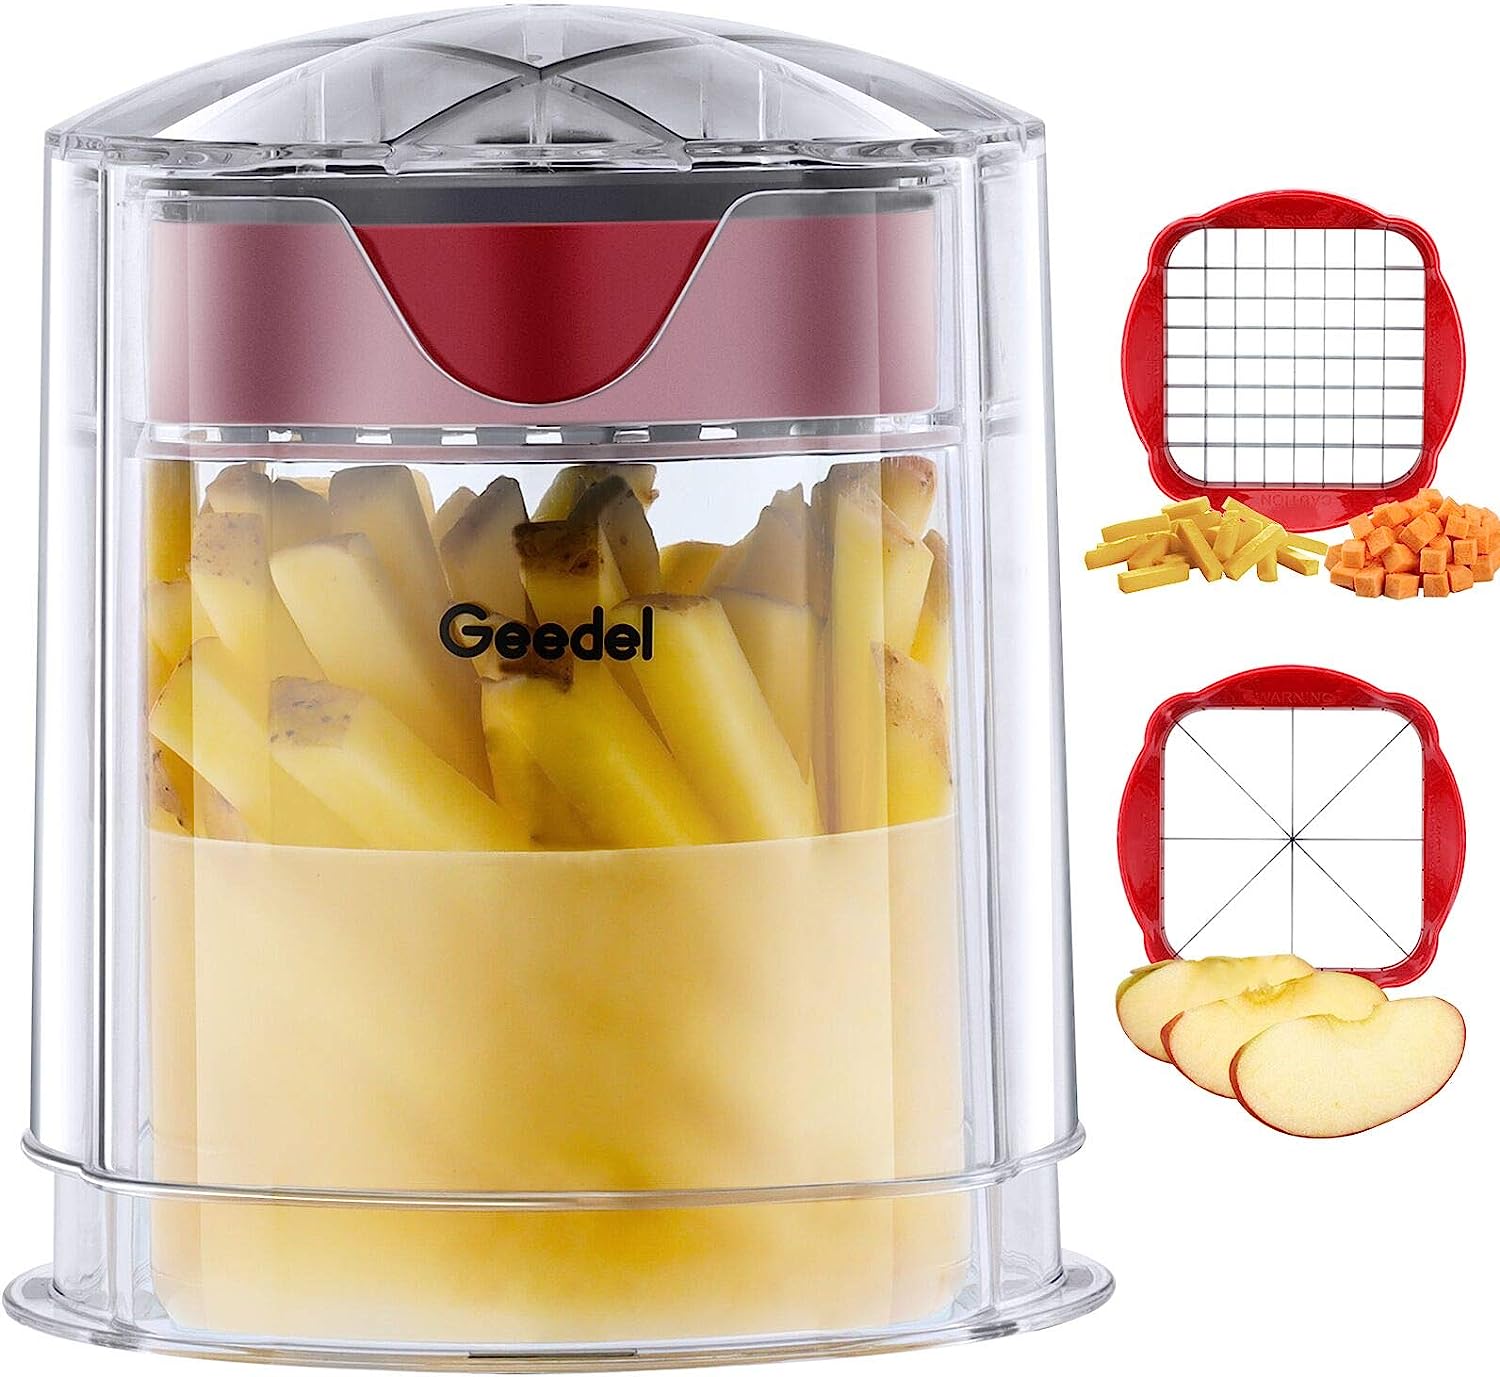 French Fry Cutter, Professional Home Style Potato [...]